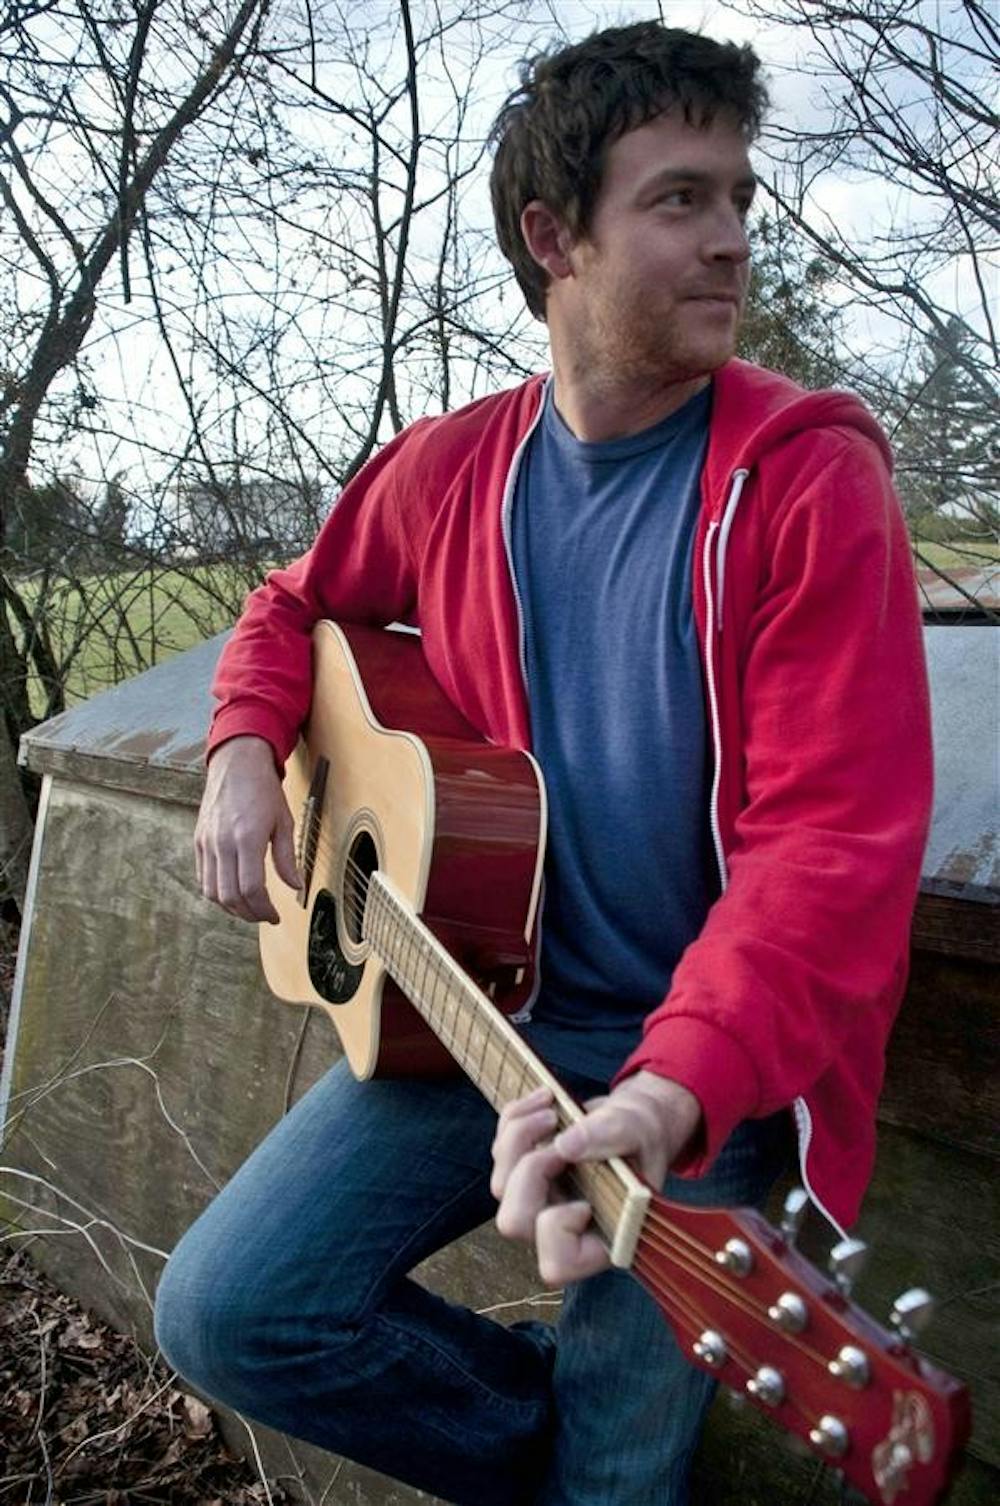 Clayton Anderson is a singer-songwriter from Bedford, Ind. His debut record is titled Torn Jeans and Tailgates.